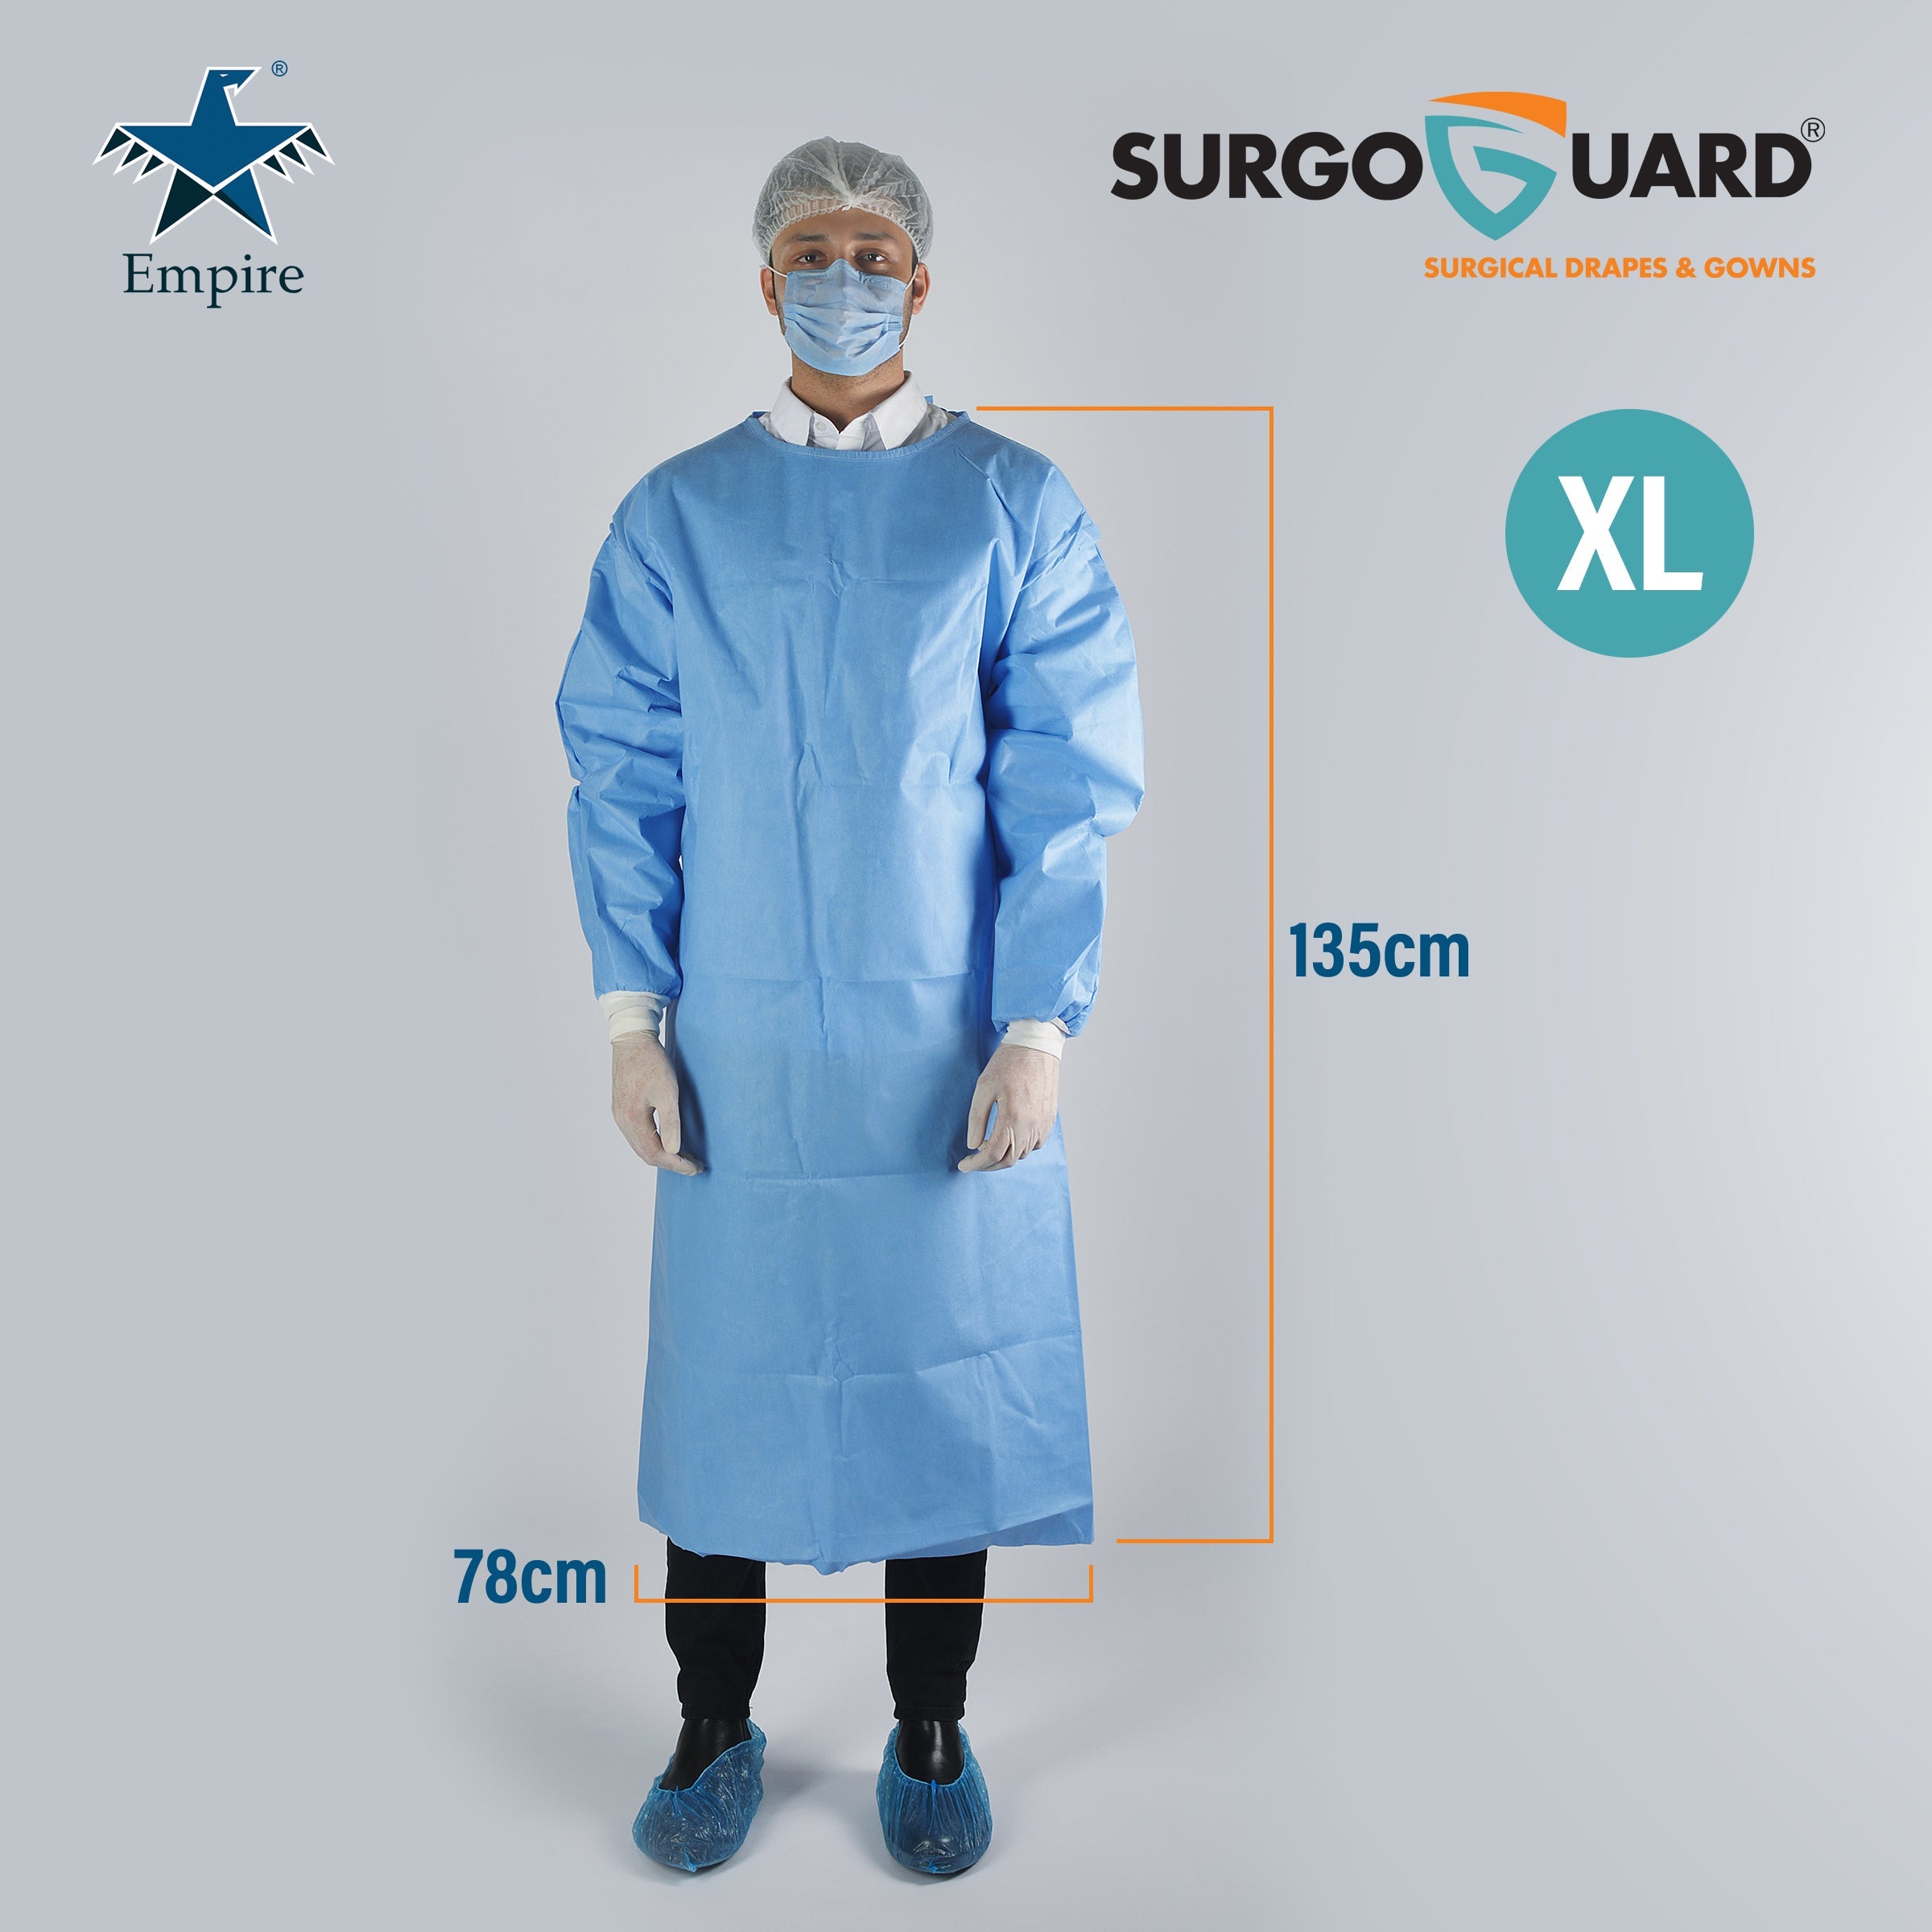 Case 40 SurgoGuard AAMI Level 4 STERILE Disposable Reinforced Impervious Surgical/Surgeon Gown 43g SMMS+30g PE Fabric, Isolation Gown Long Sleeves, Knitted Cuffs, Spunlace Waist Ties (Extra Large) XL - EmpireMedical 